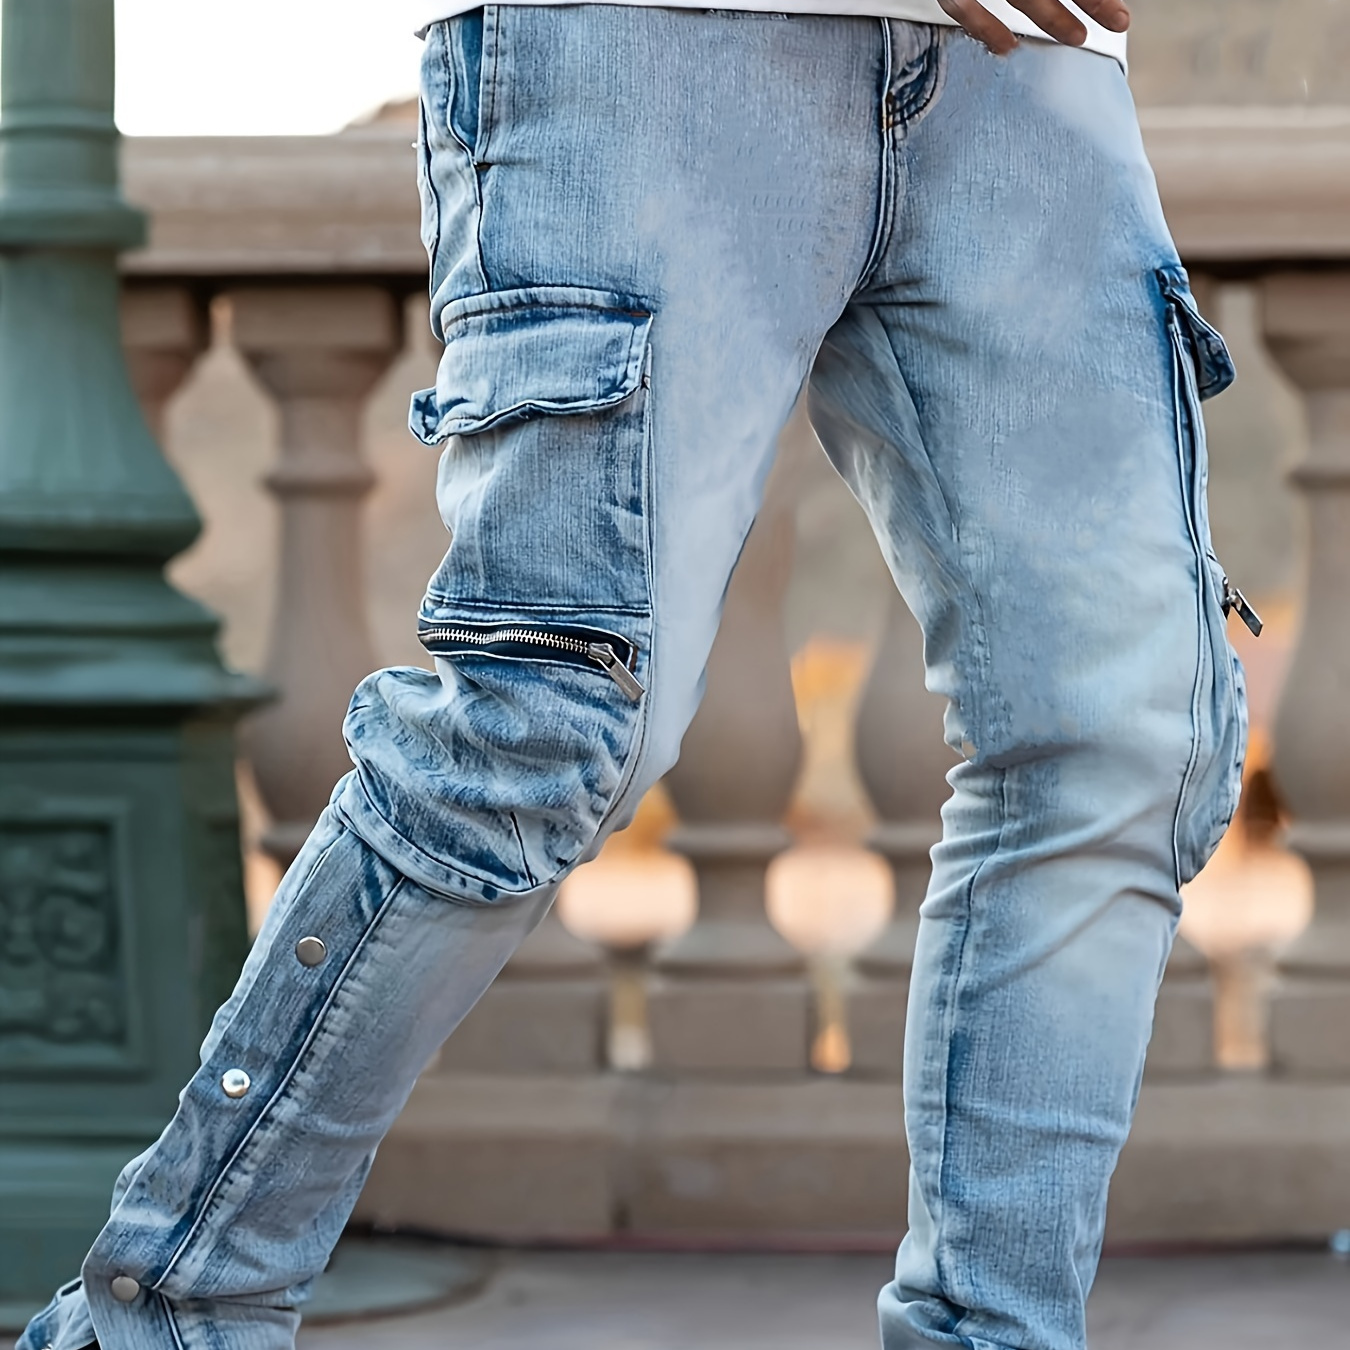 

Men's Solid Multi-pocket Cargo Denim Pants For Outdoor, Trendy Leisure Jeans For Males